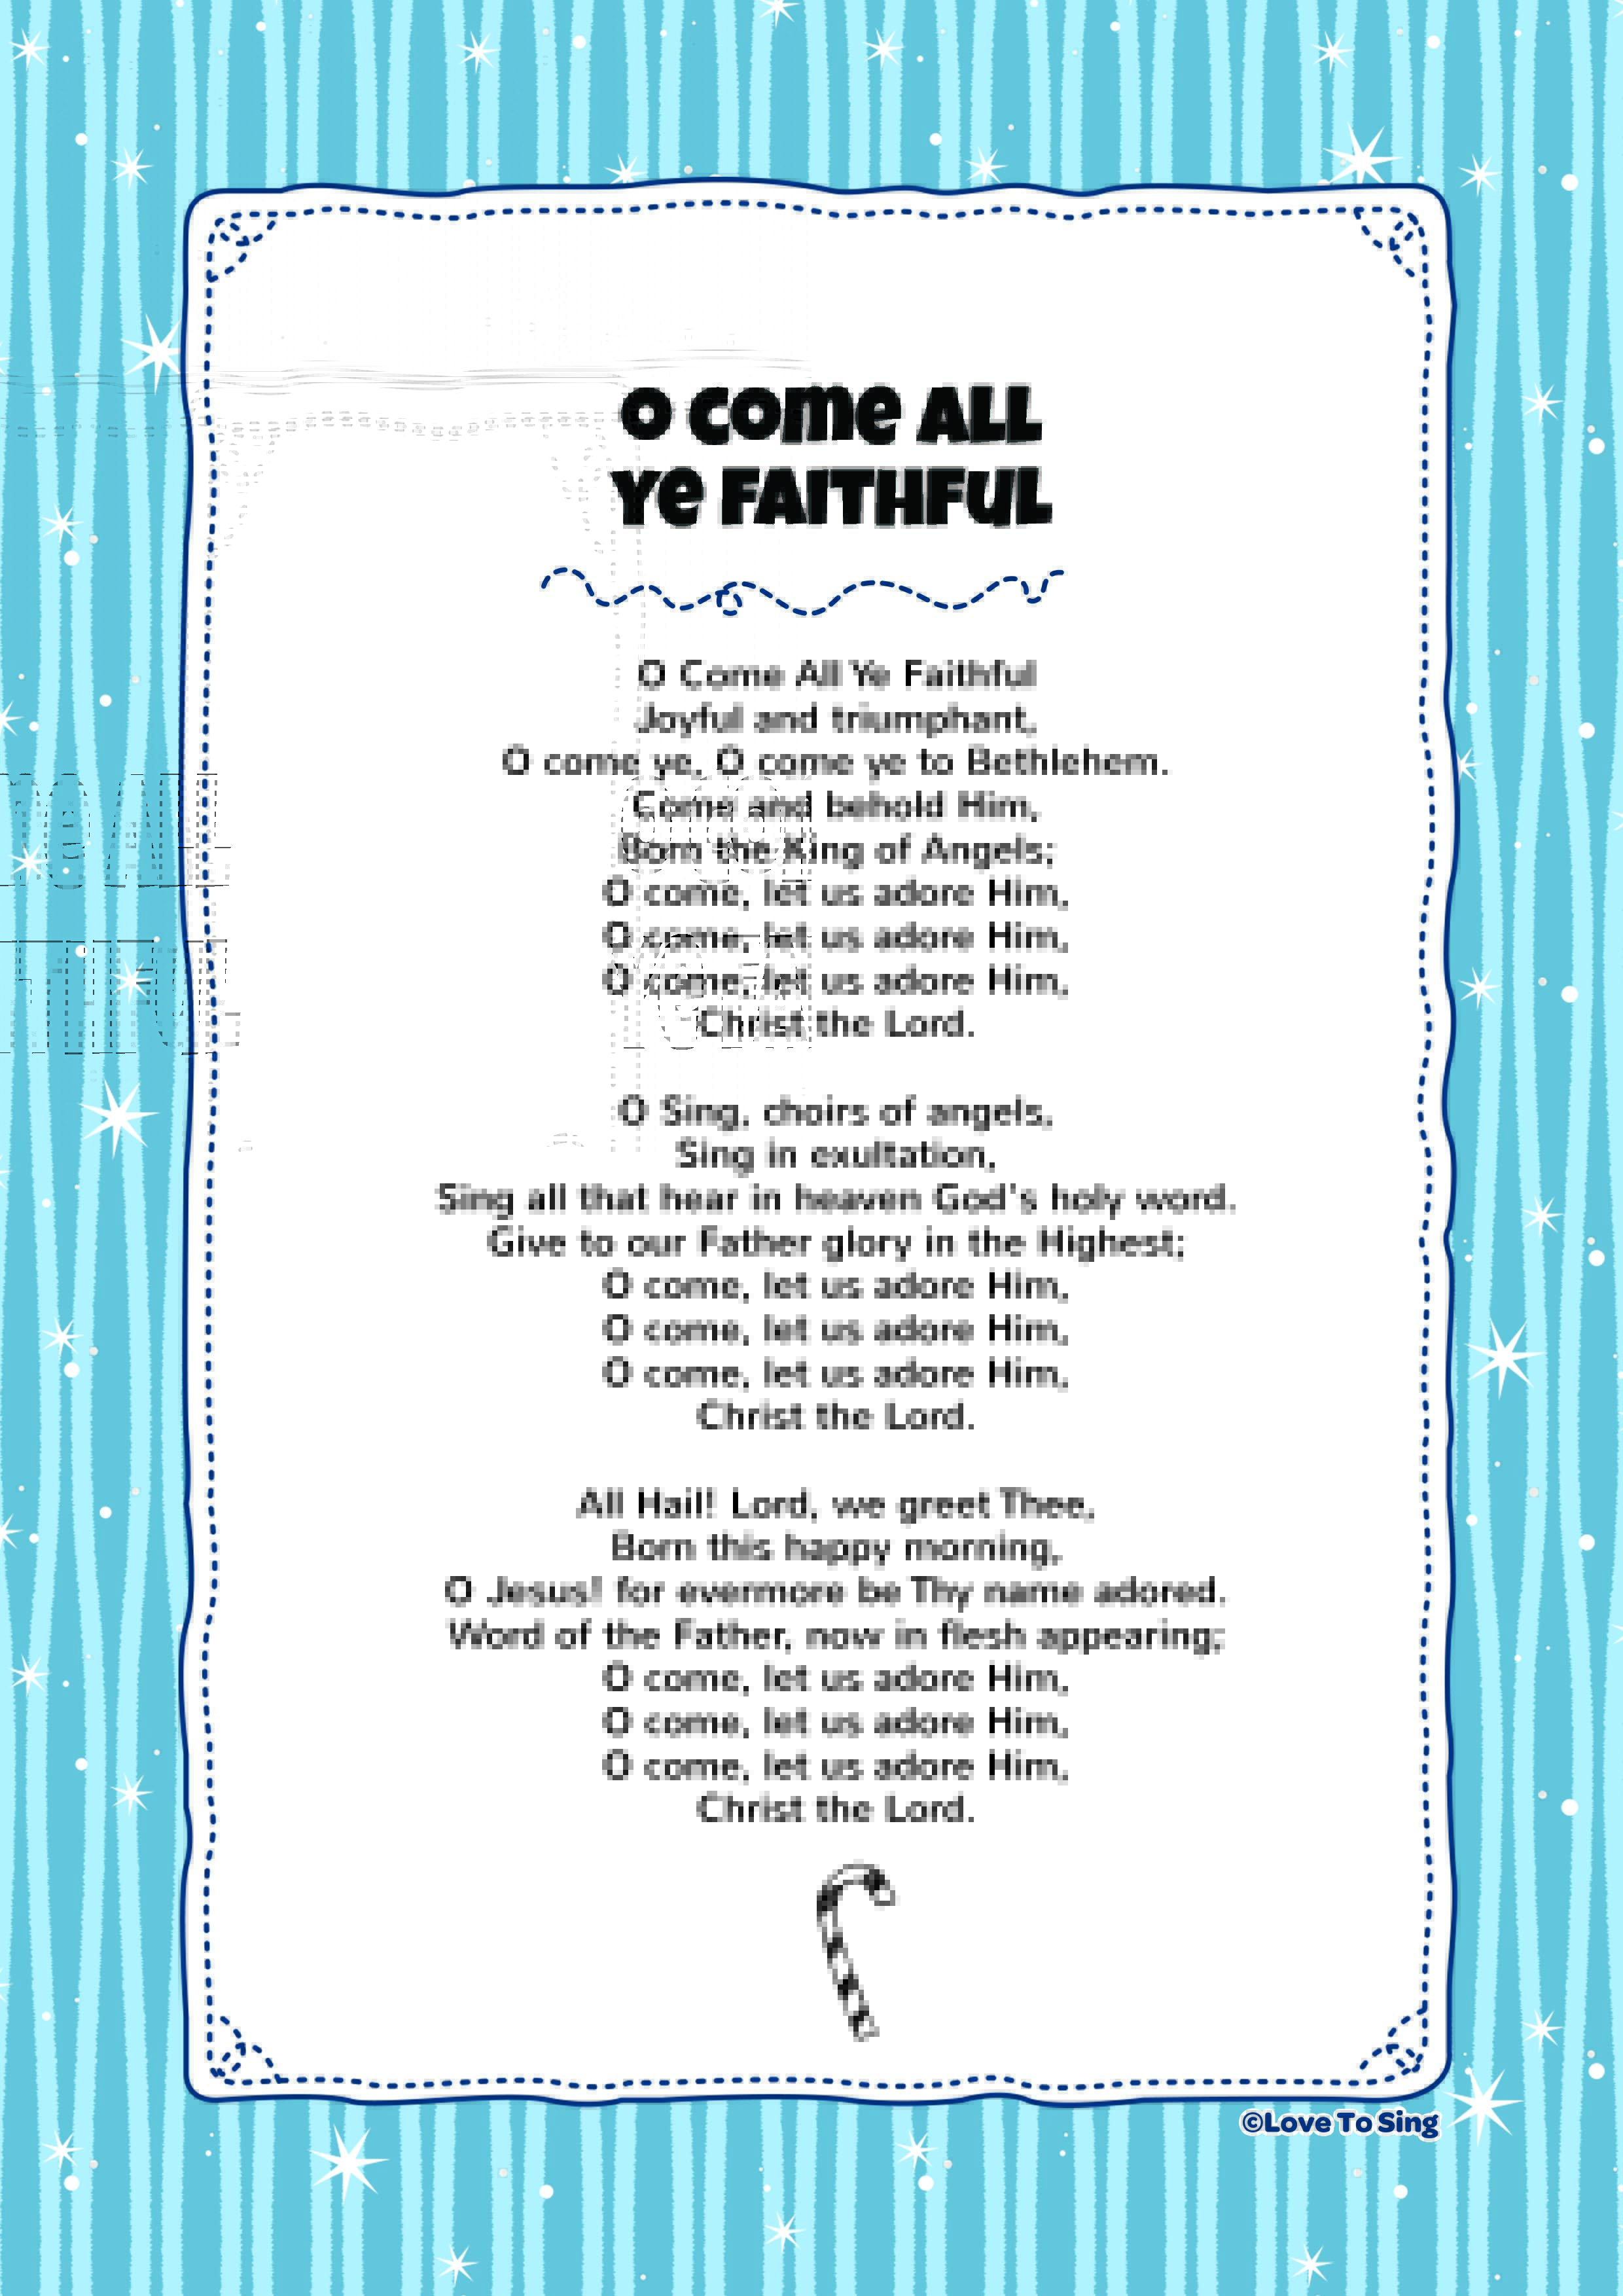 O Come All Ye Faithfull | Kids Video Song with FREE Lyrics & Activities!